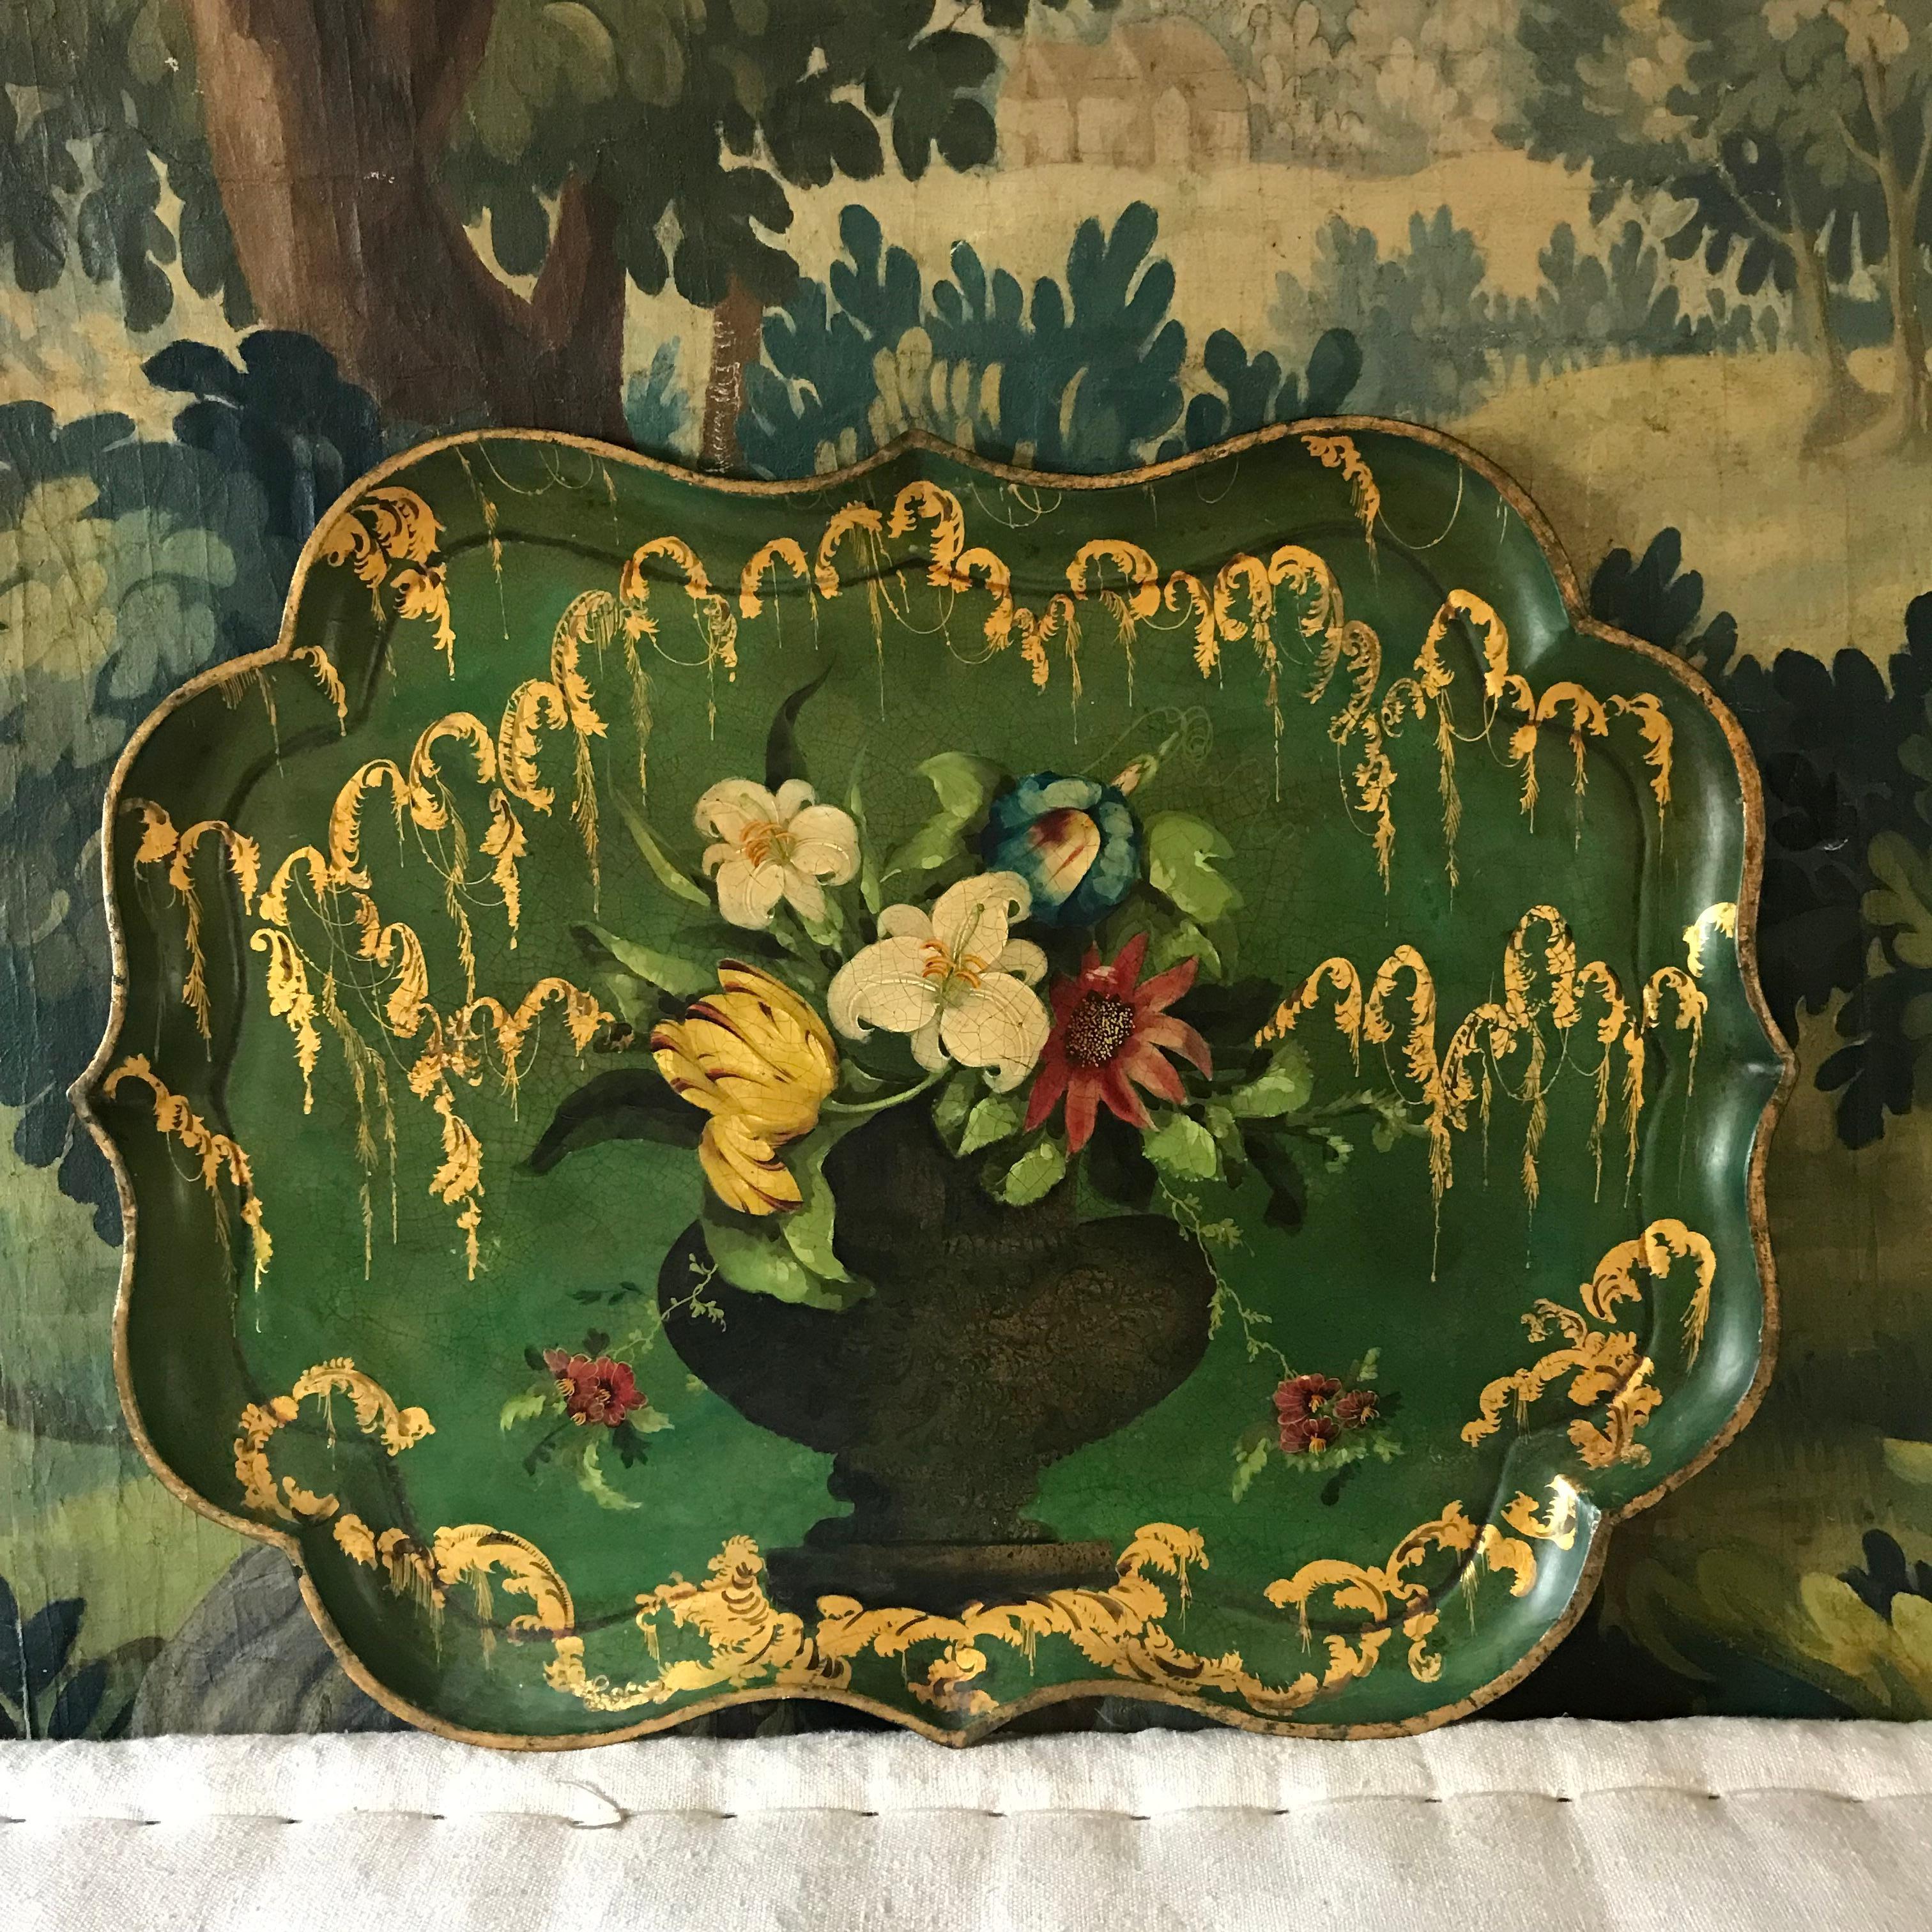 Hand decorated 19th century papier-mâché tray in superb condition - in an unusual emerald green base colour - hand painted with tulips lilies and flowers and hand gilded decoration with a gilded edge - rare to find a papier-mâché tray in this